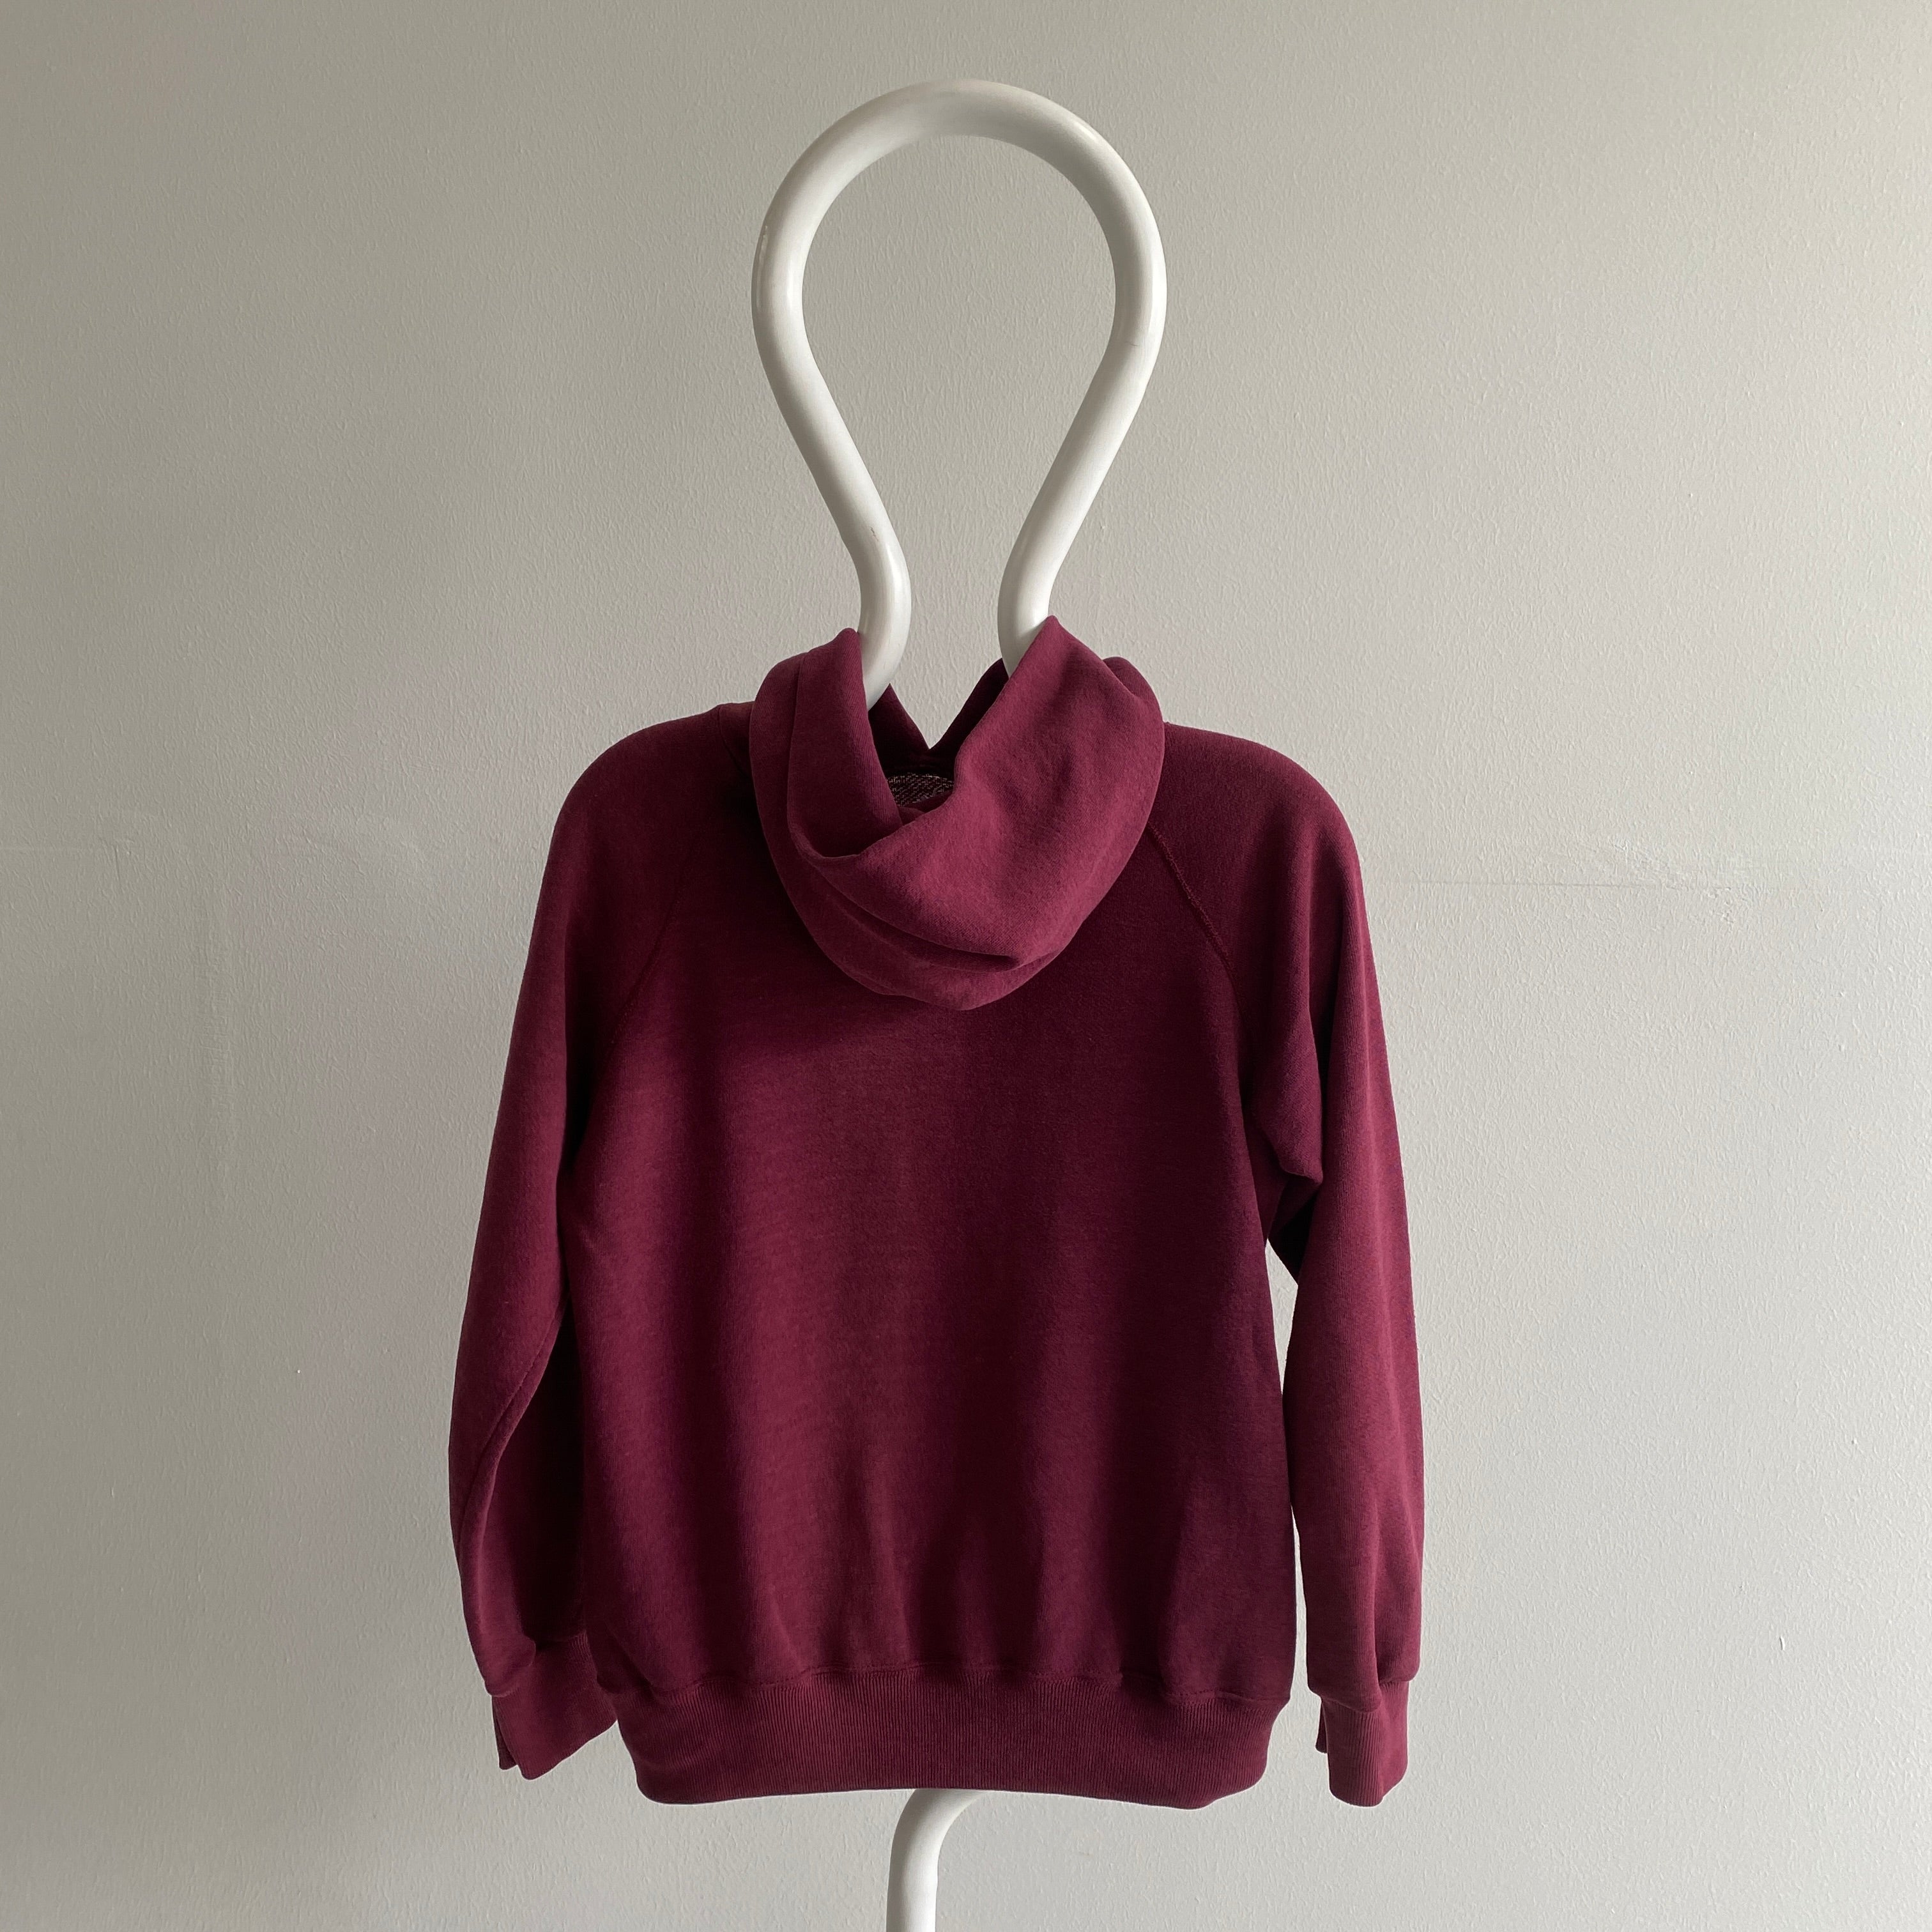 1980s Thin Soft and Slouchy Smaller Sized Blank Burgundy Pullover Hoodie